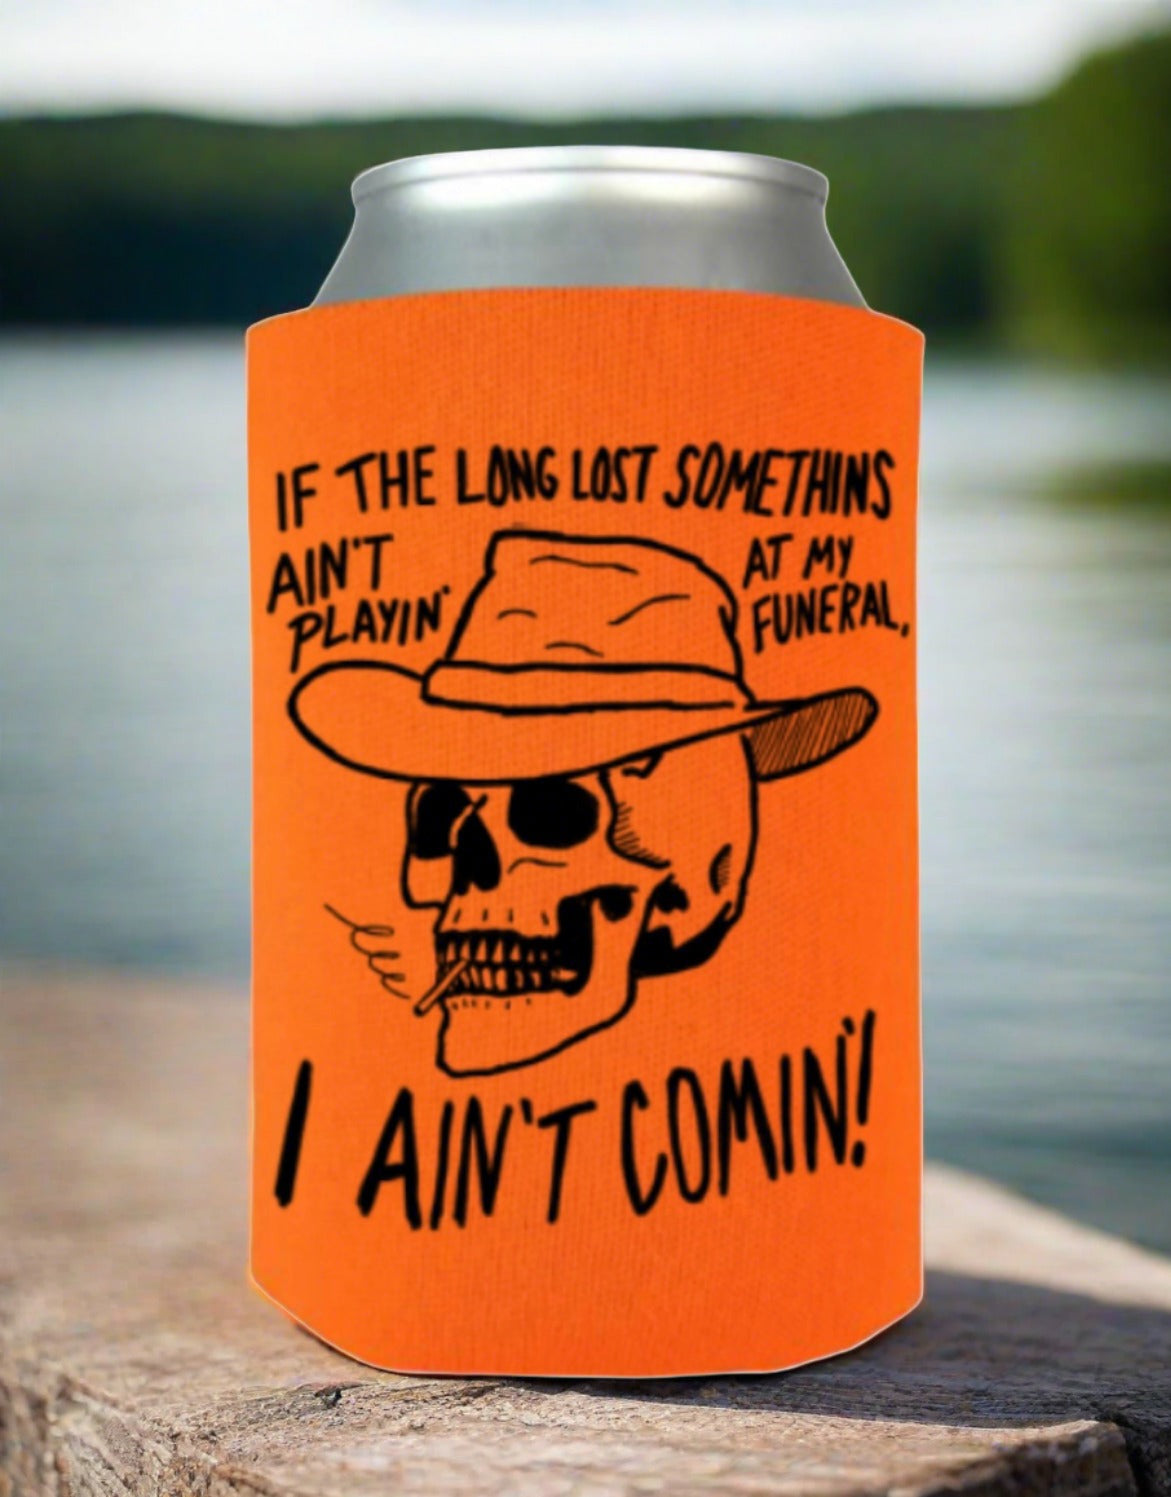 The Long Lost Somethins "If" Koozie - PREORDER